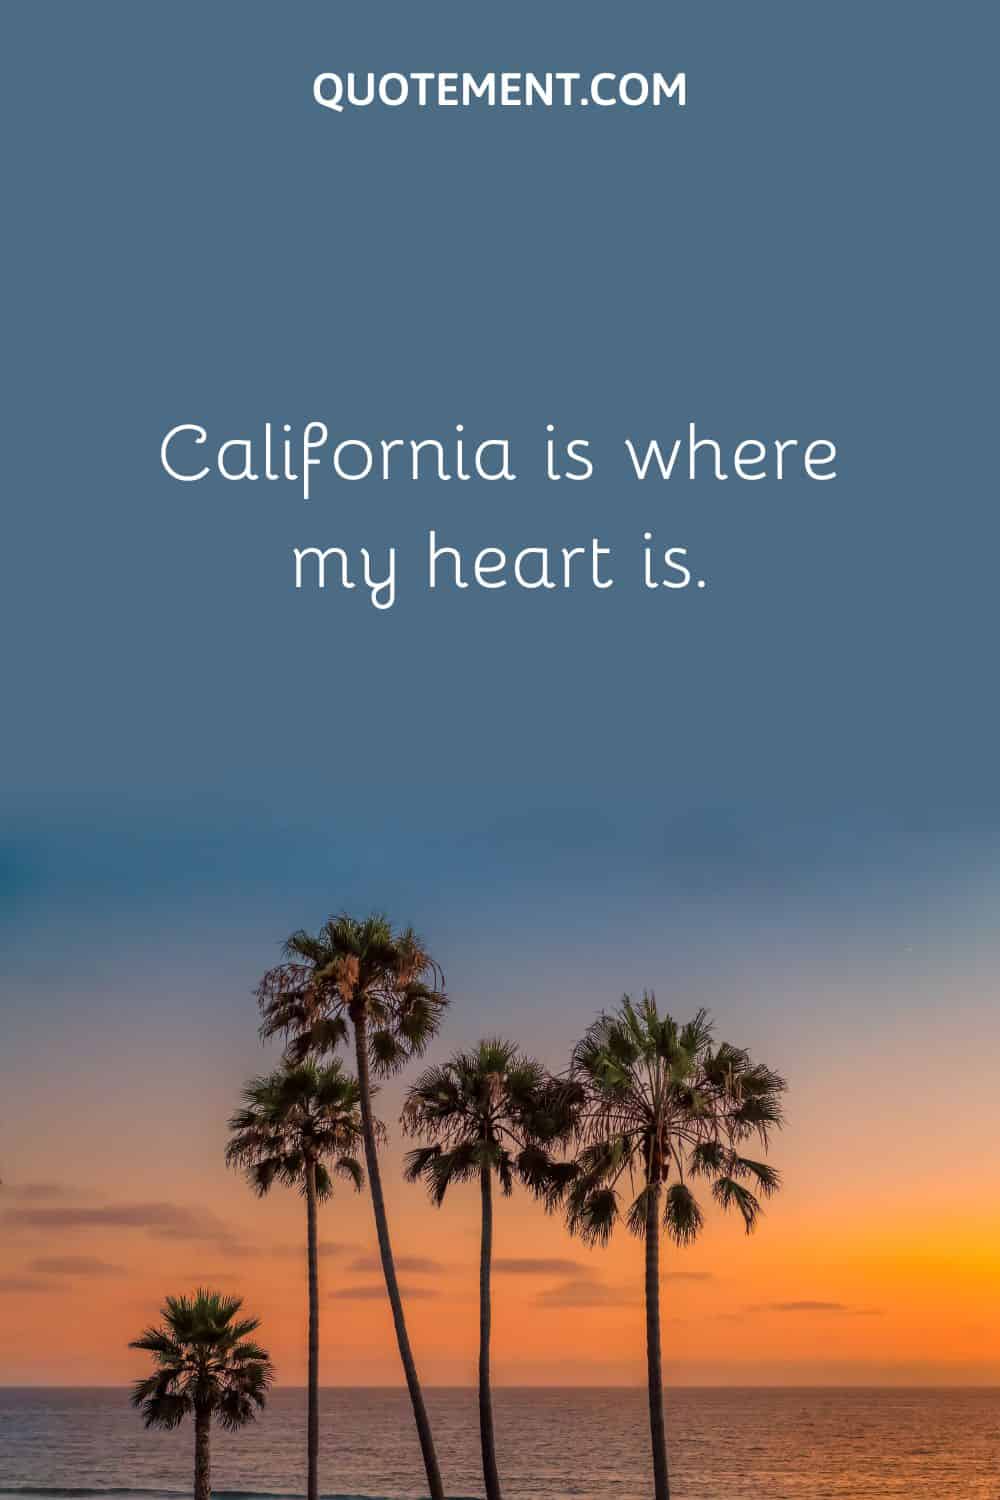 California is where my heart is